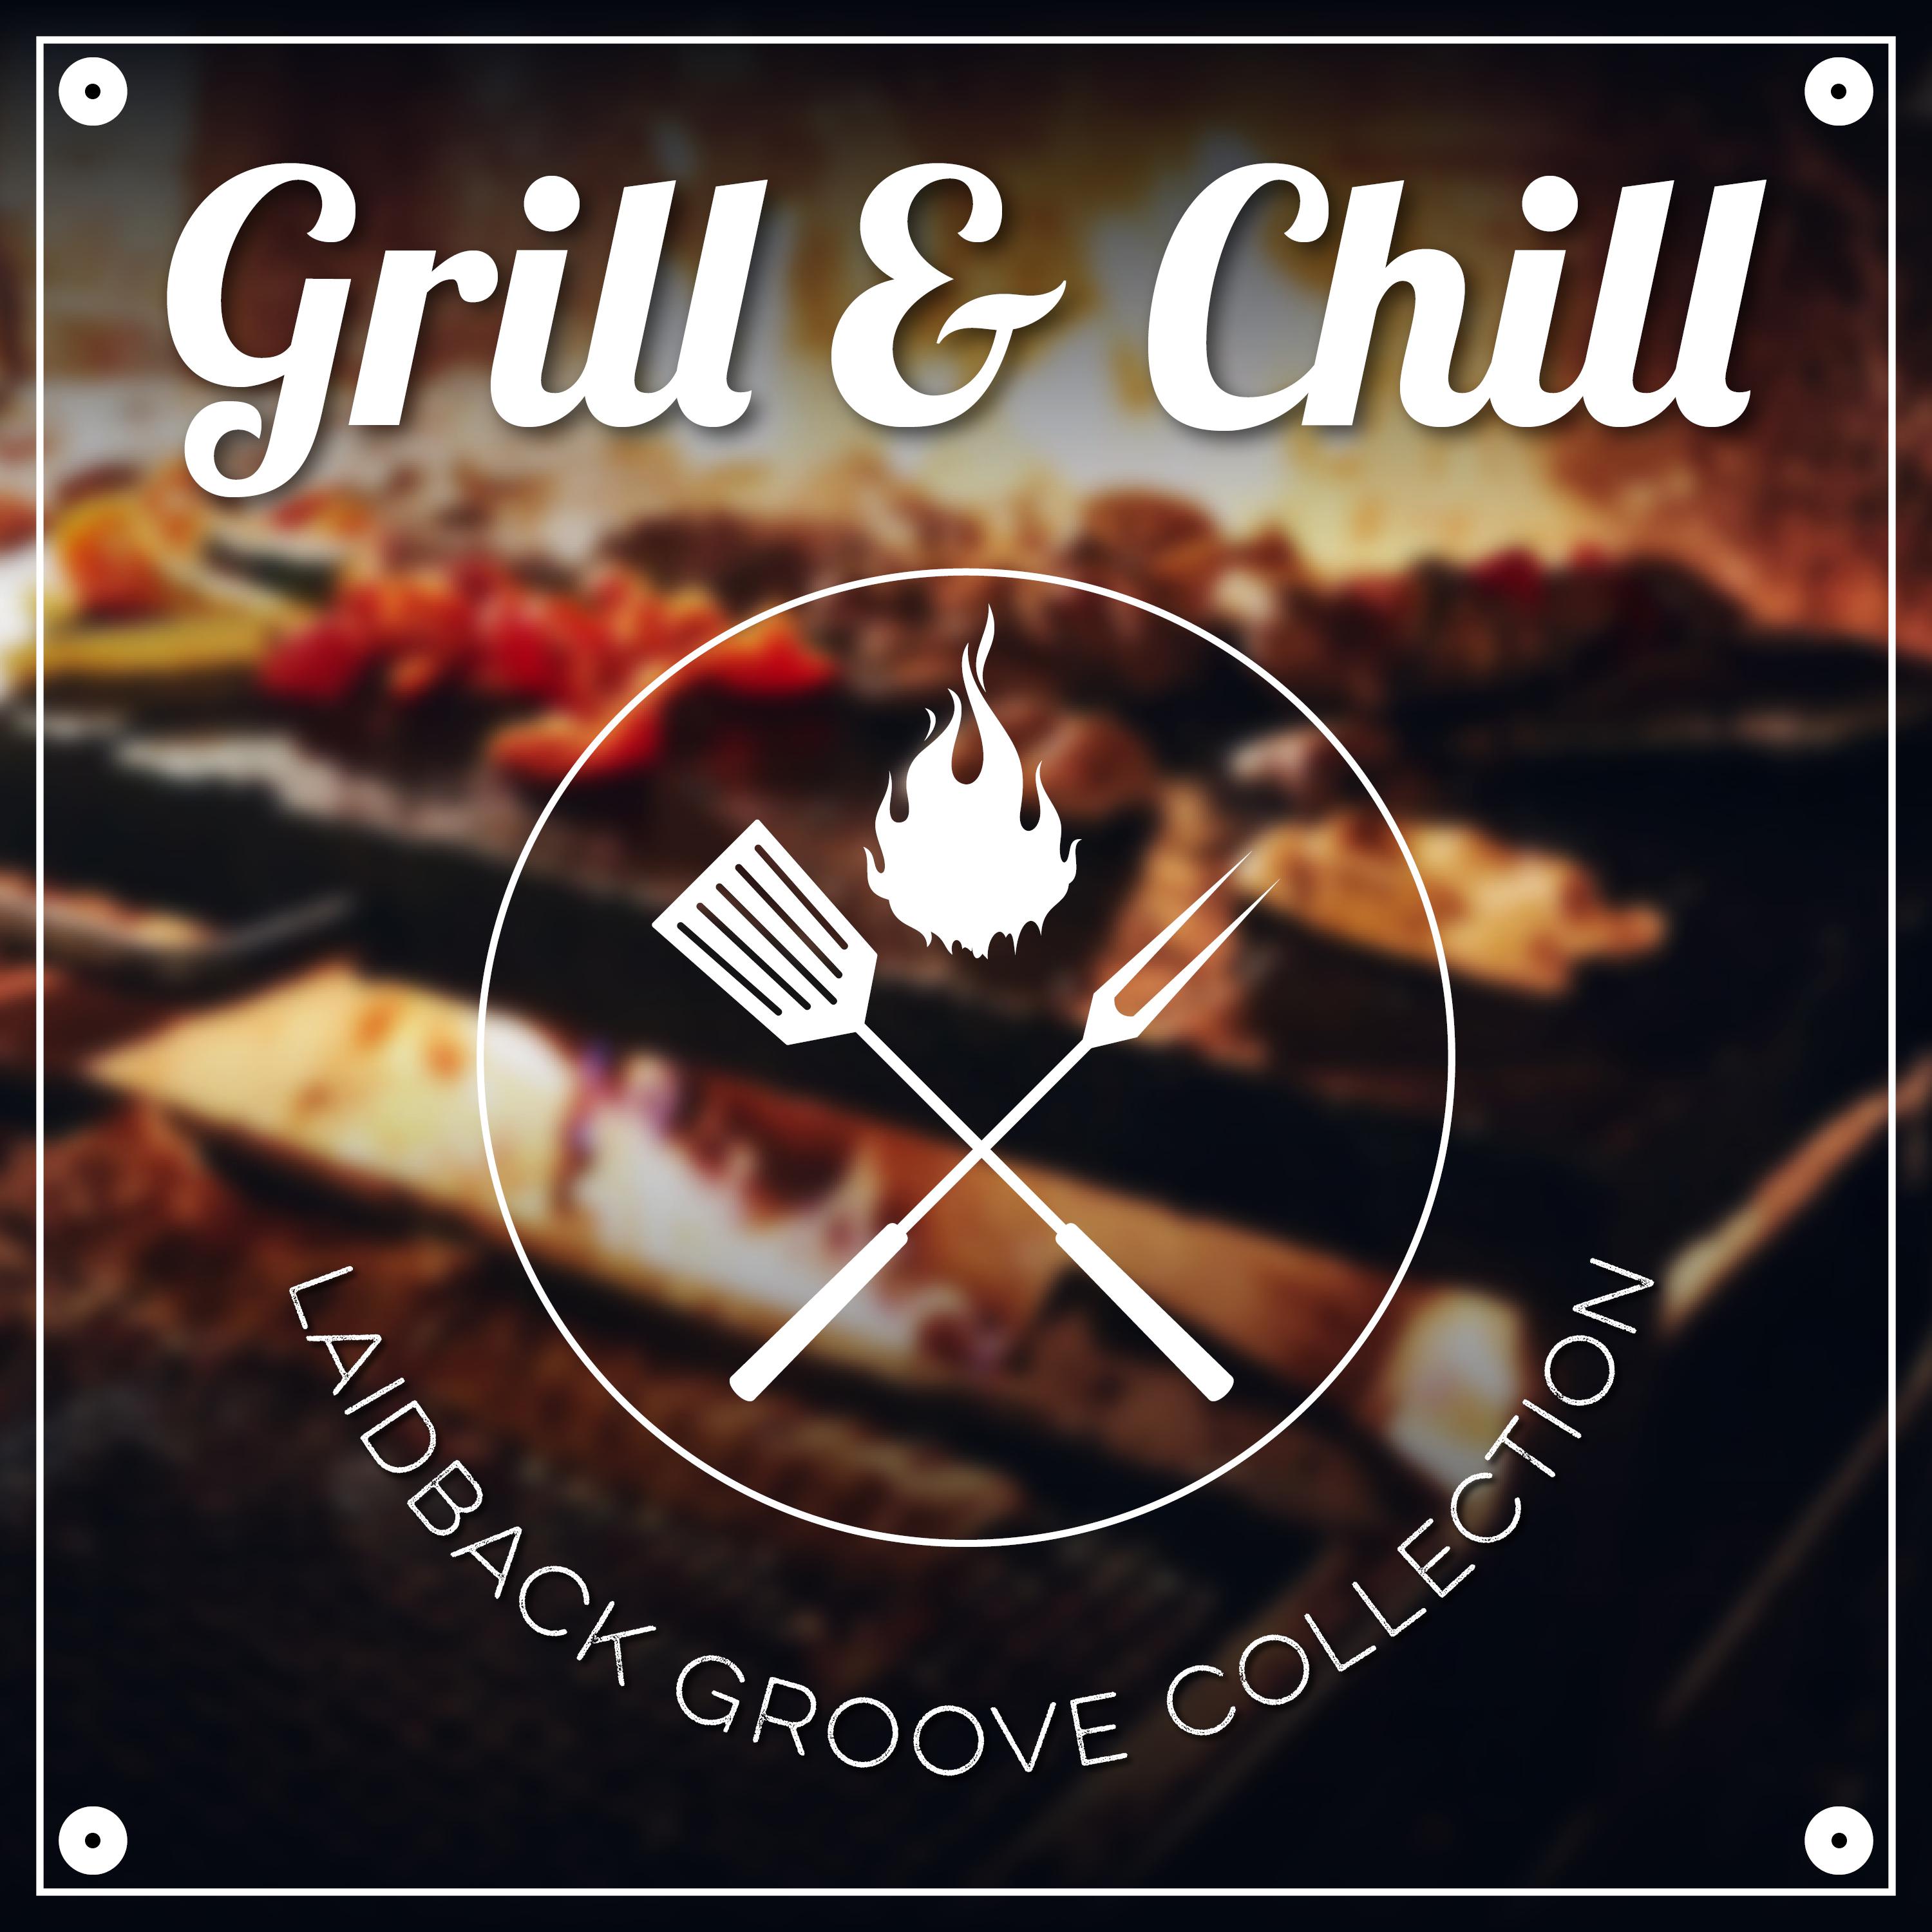 Grill & Chill - Laidback Groove Collection